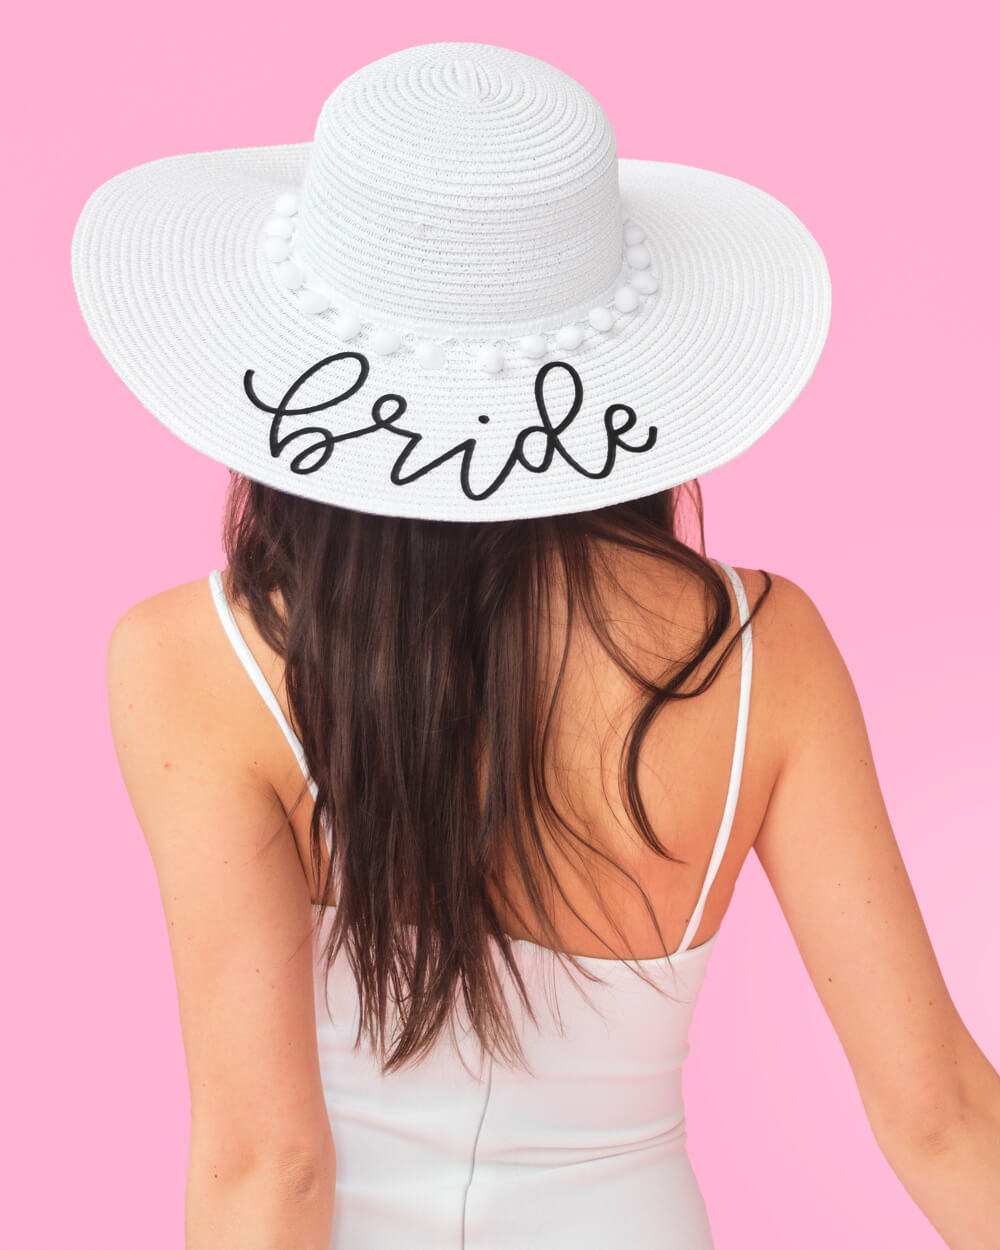 Los Cabos Hat - white and black sun hat